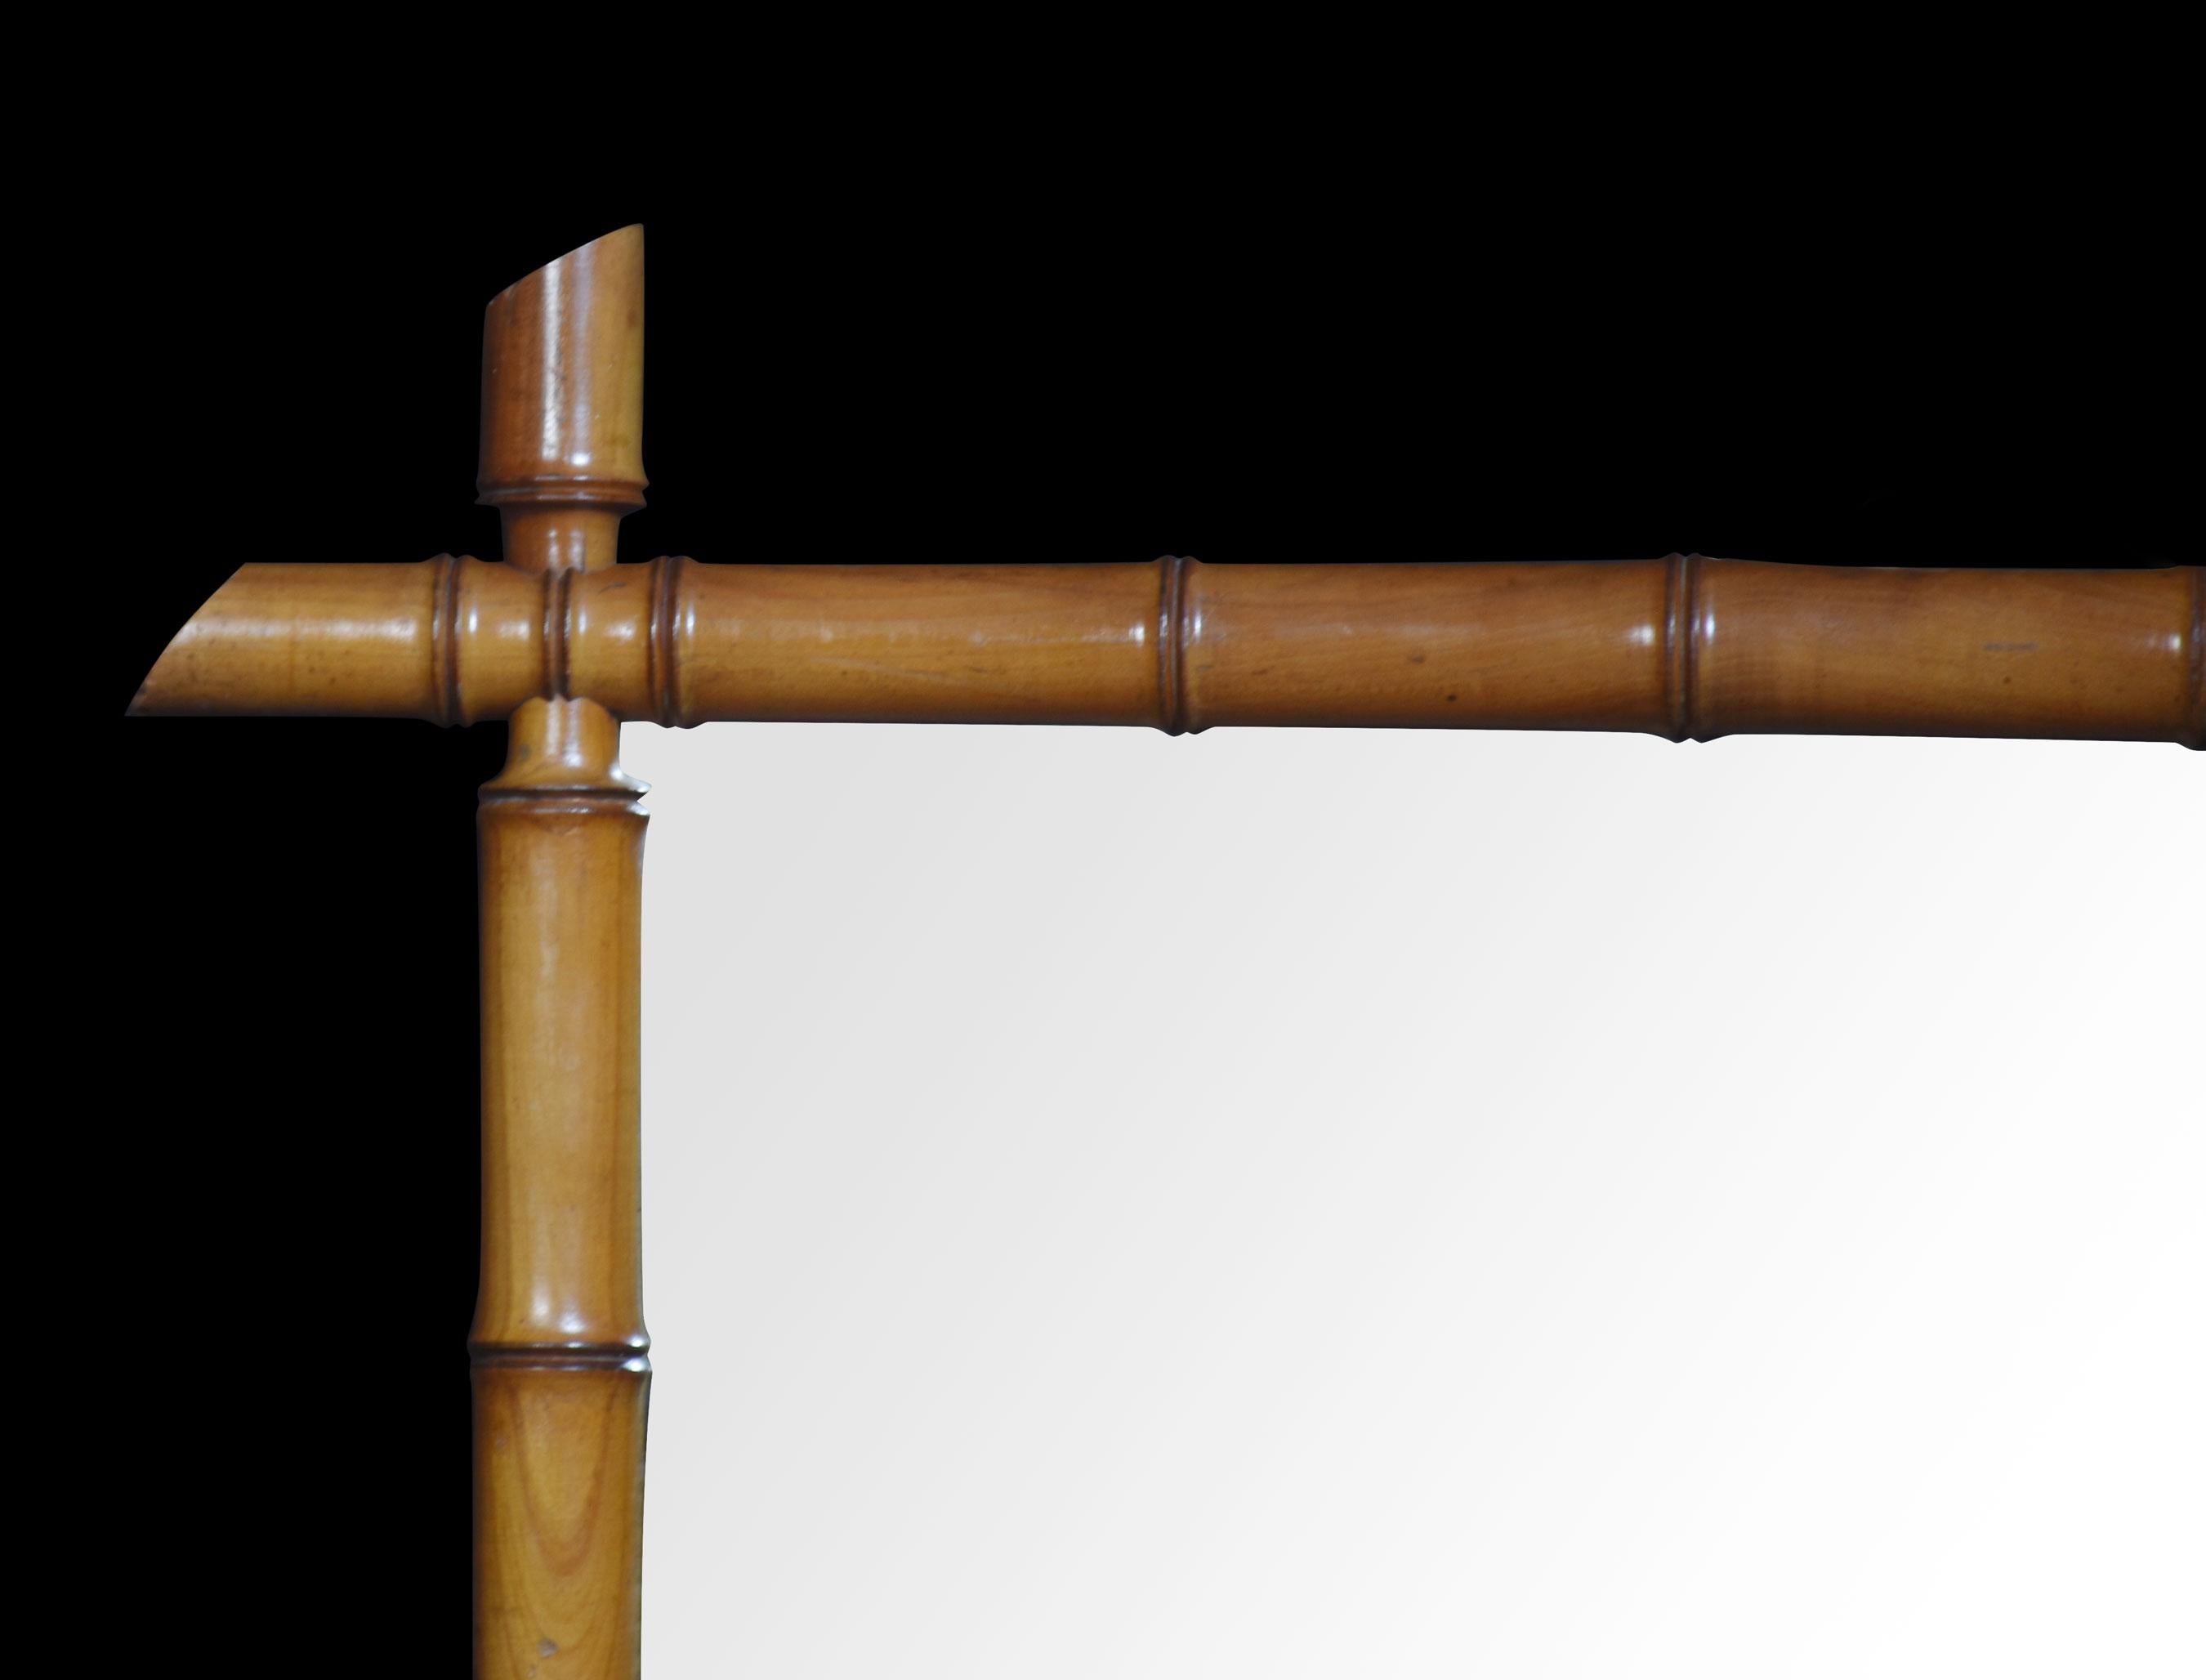 19th-century wall mirror, the simulated bamboo frame encasing the original mirror plate.
Dimensions
Height 28.5 Inches
Width 22.5 Inches
Depth 2 Inches